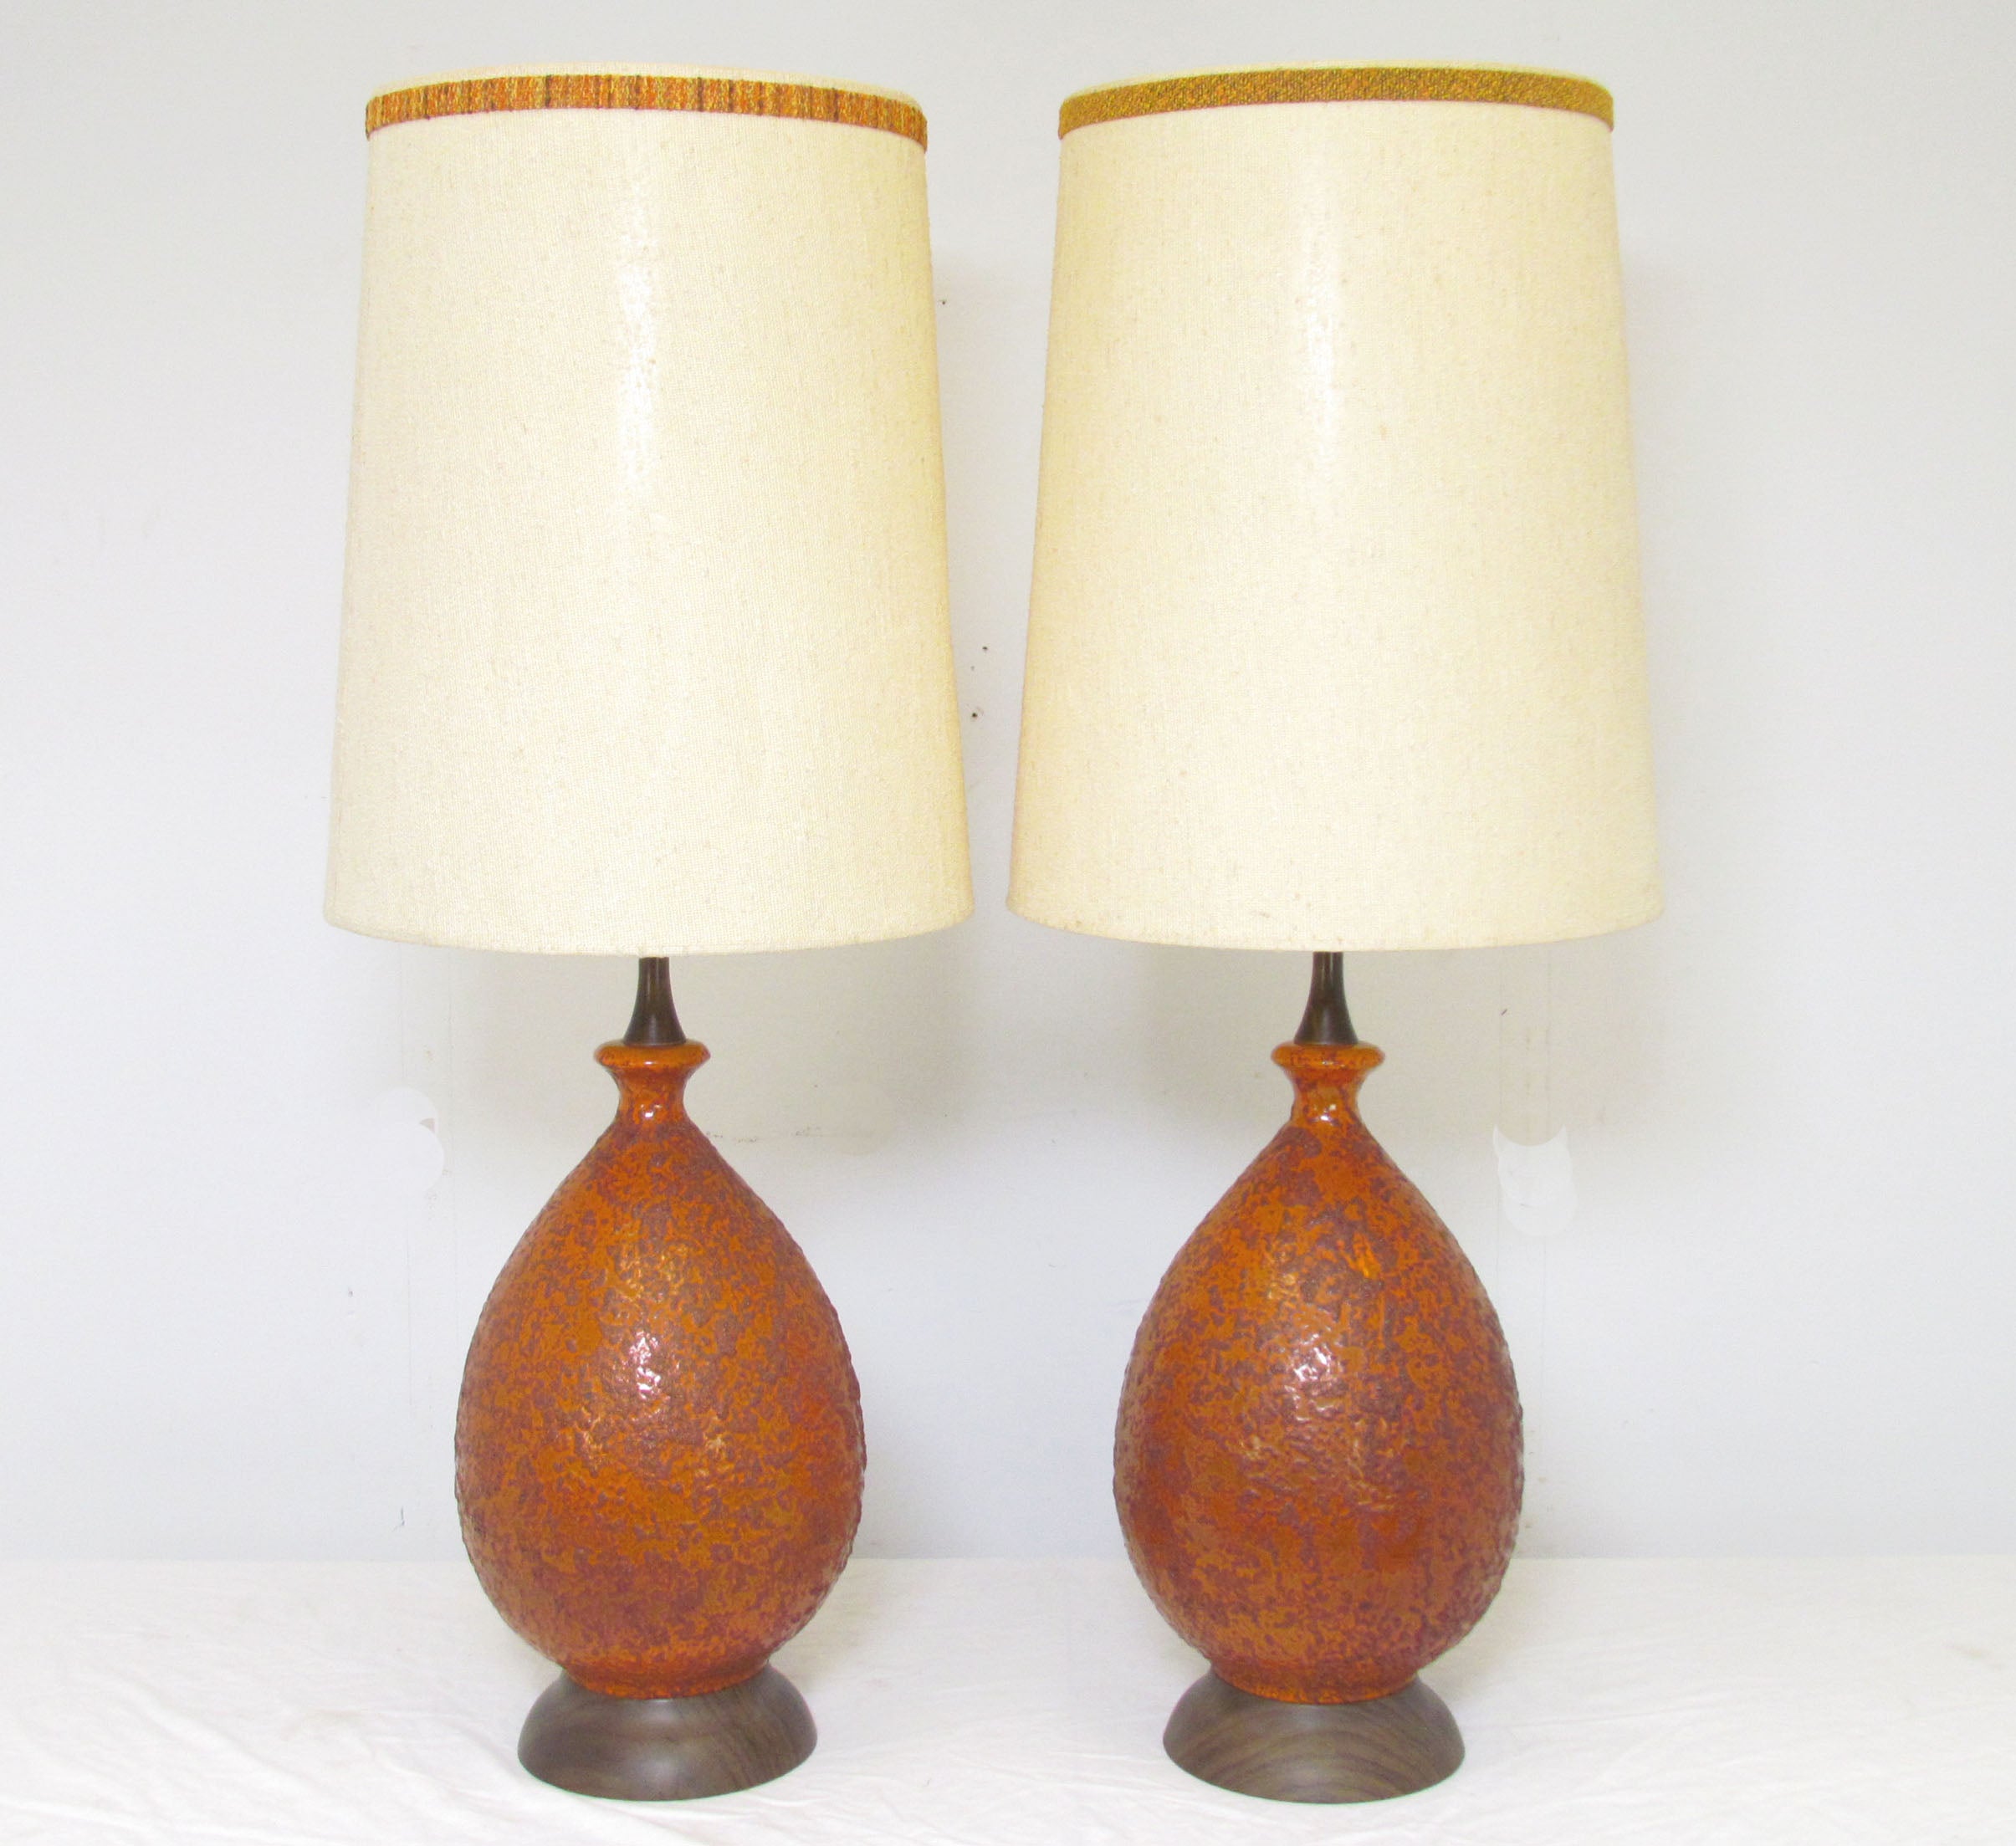 Pair of Mid-Century Modern Lamps with Curdled Glaze